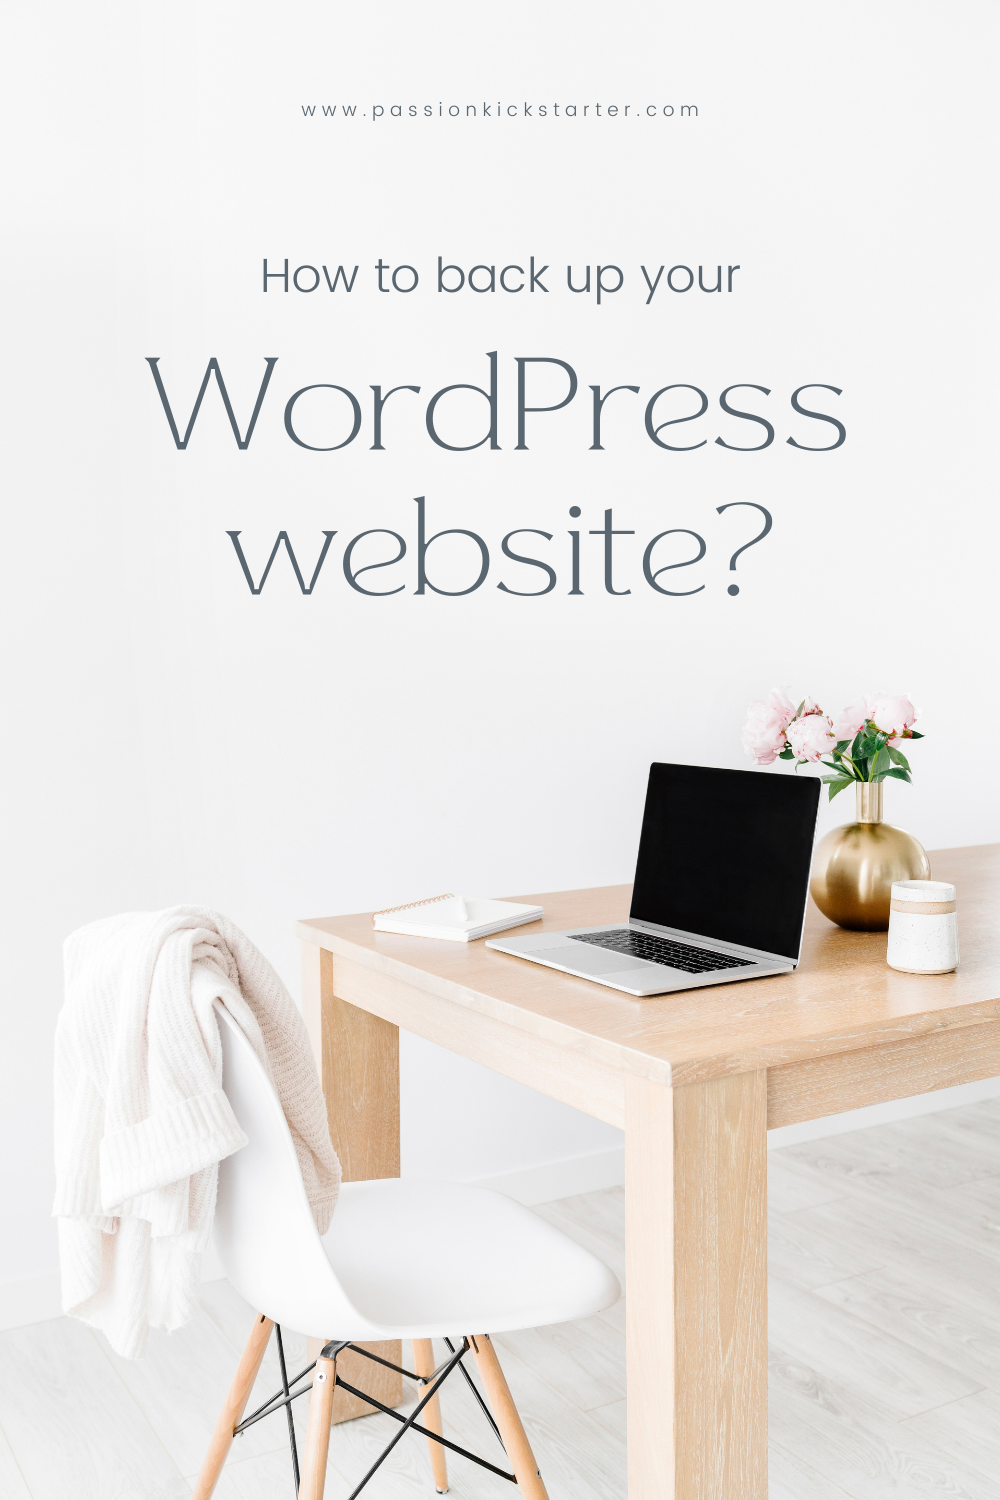 How to back up your WordPress site